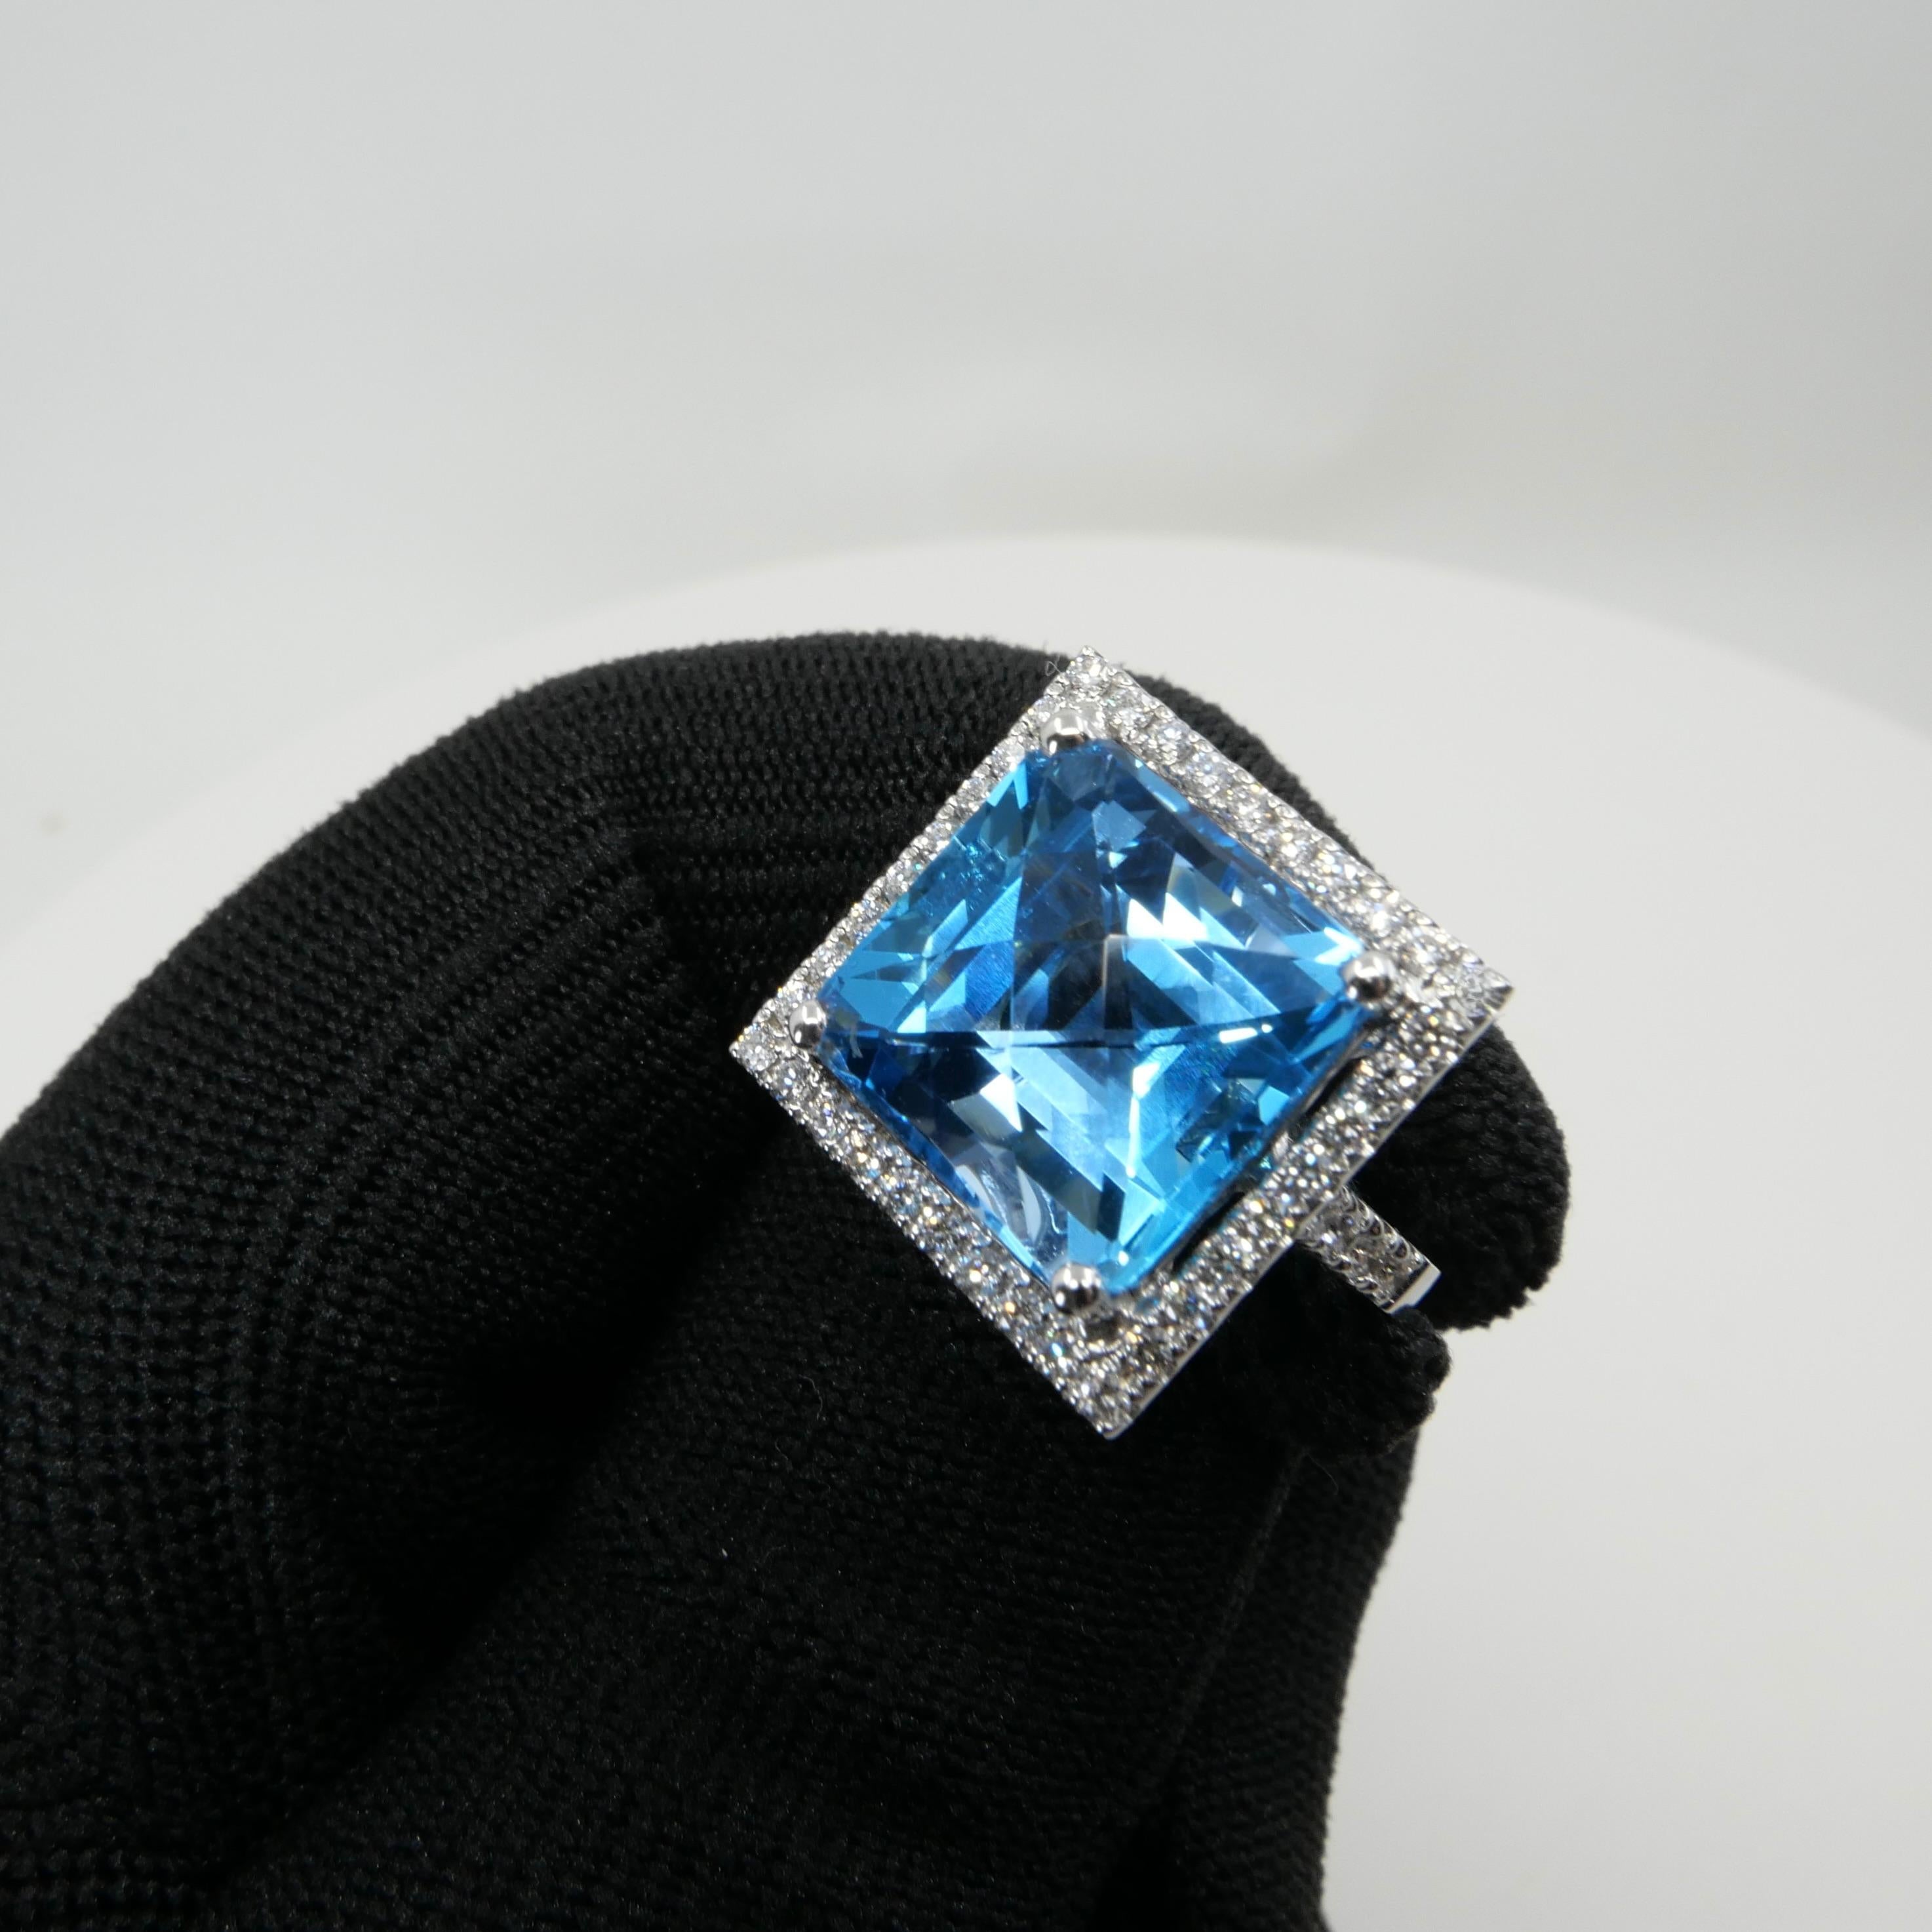  13 Cts checker Square Cut Blue Topaz & Diamond Cocktail Ring. Big Statement. For Sale 6